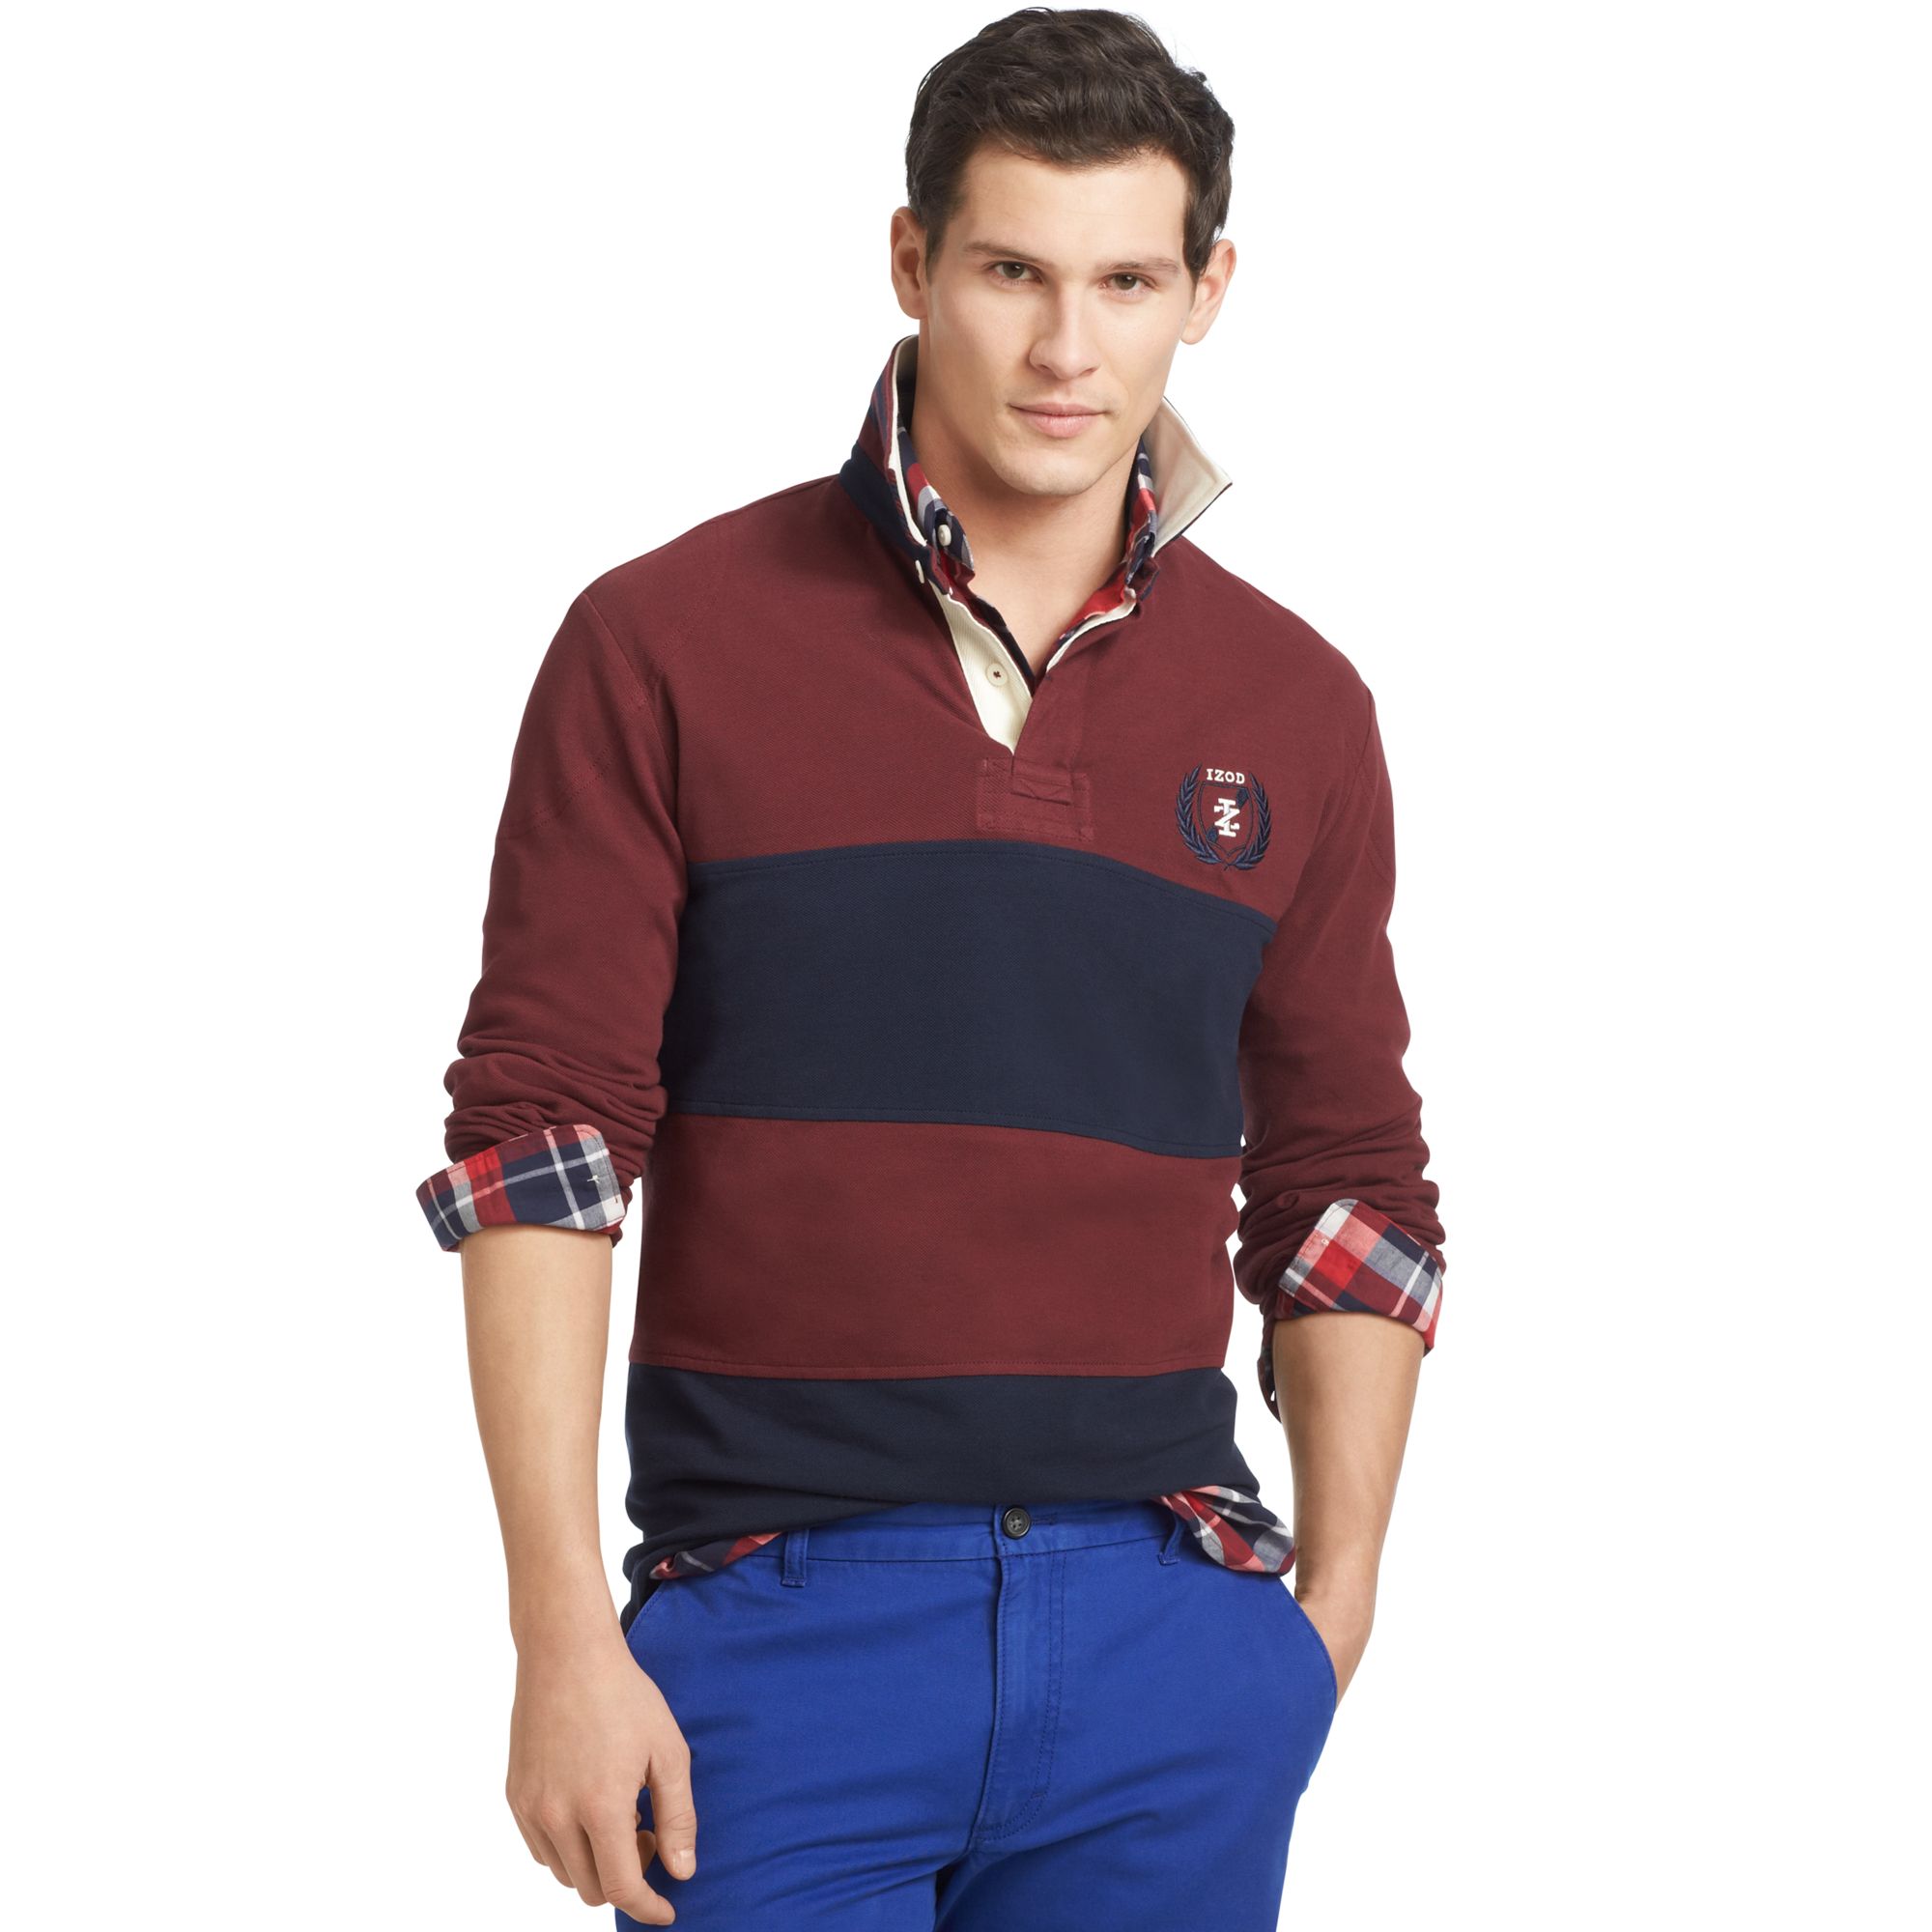 Lyst - Izod Shirt Longsleeve Striped Rugby Polo in Blue for Men